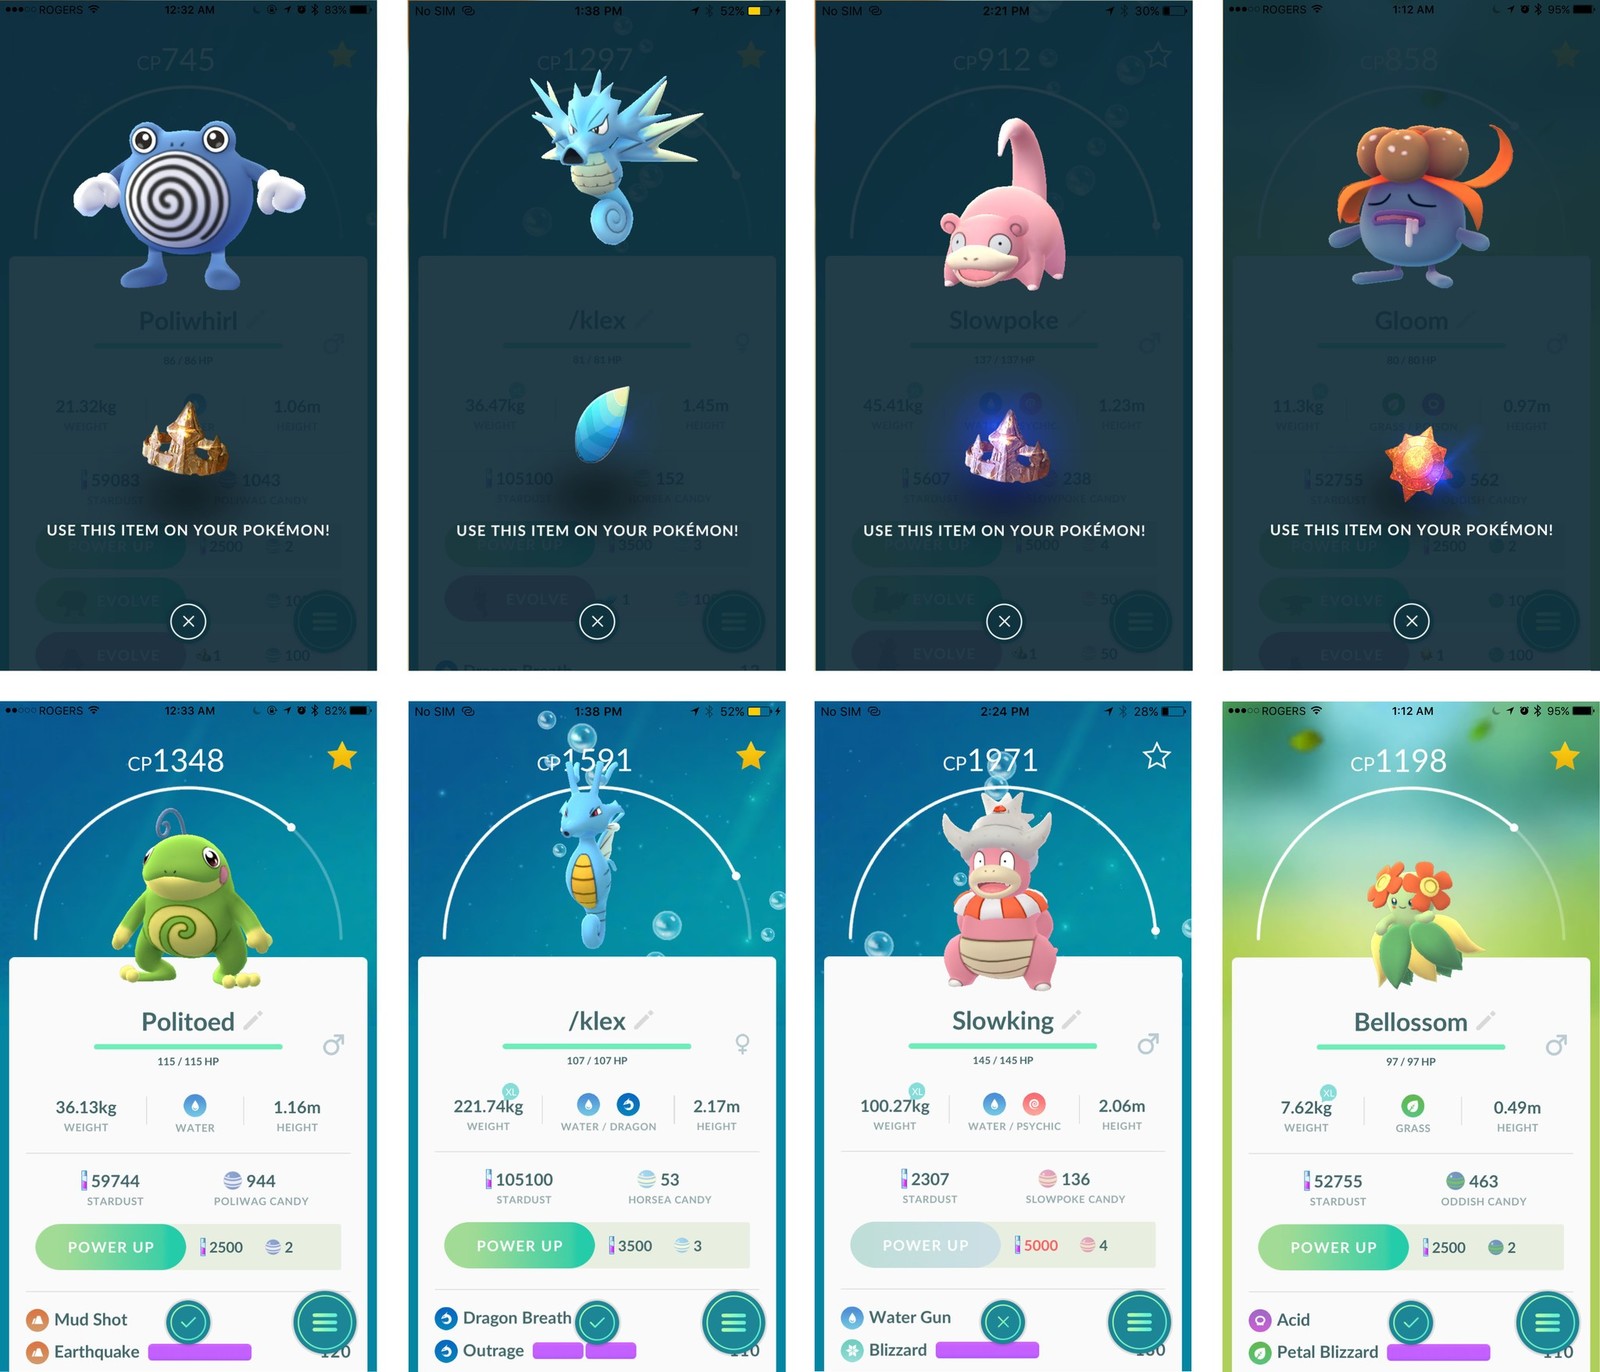 PokÃ©mon Go: How to get and use Evolution Items